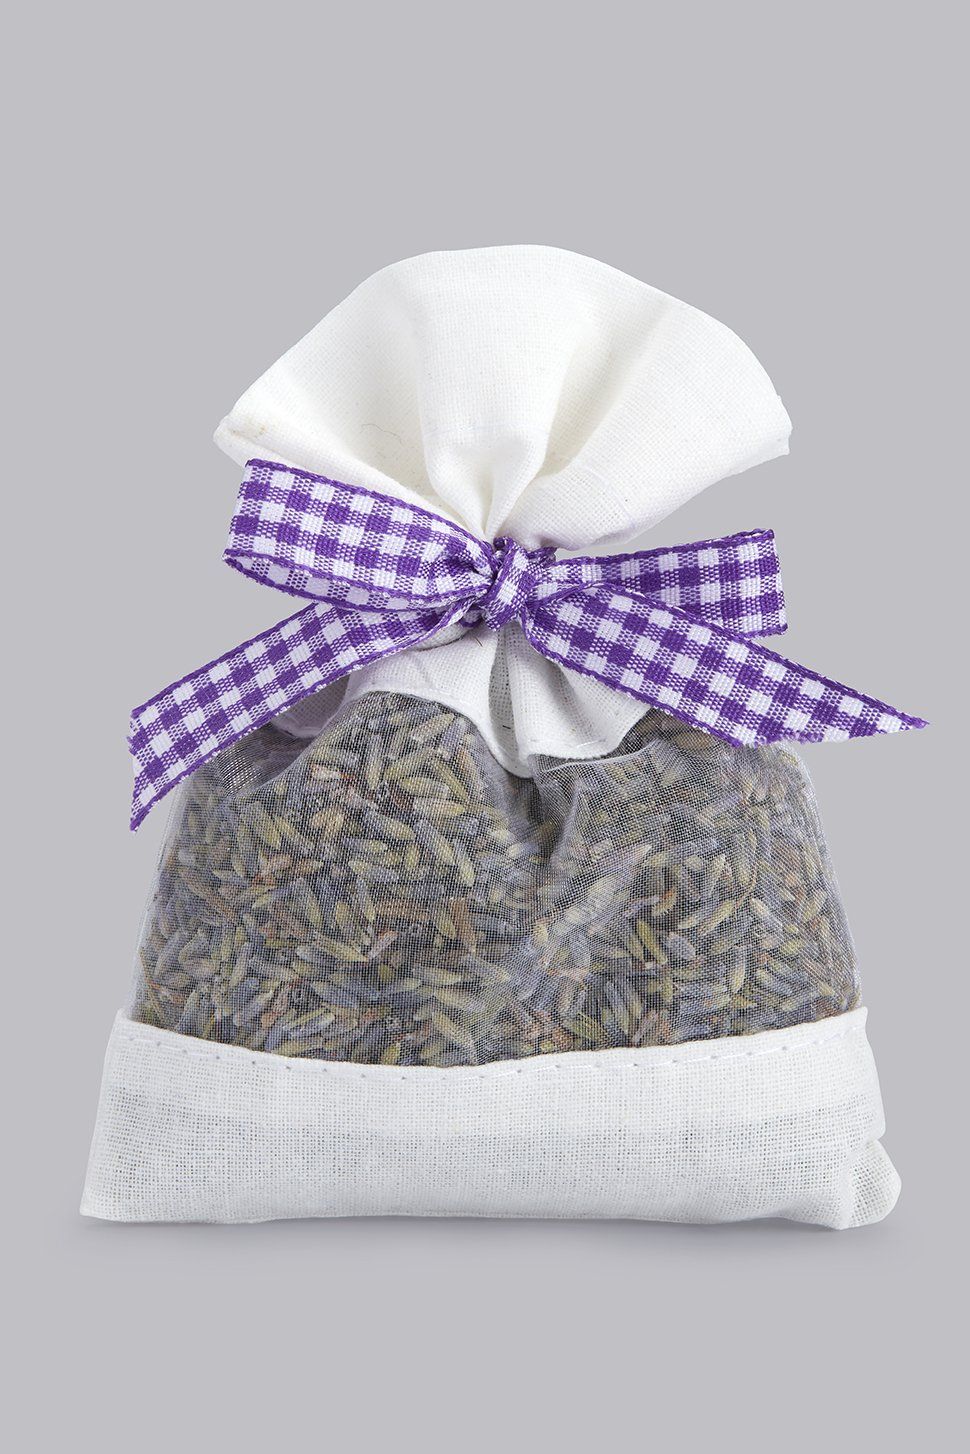 Lavender scented Bags by Lavender Hill Clothing - Lavender Sachets - Lavender Draw Linens - Lavender scent to prevent moths